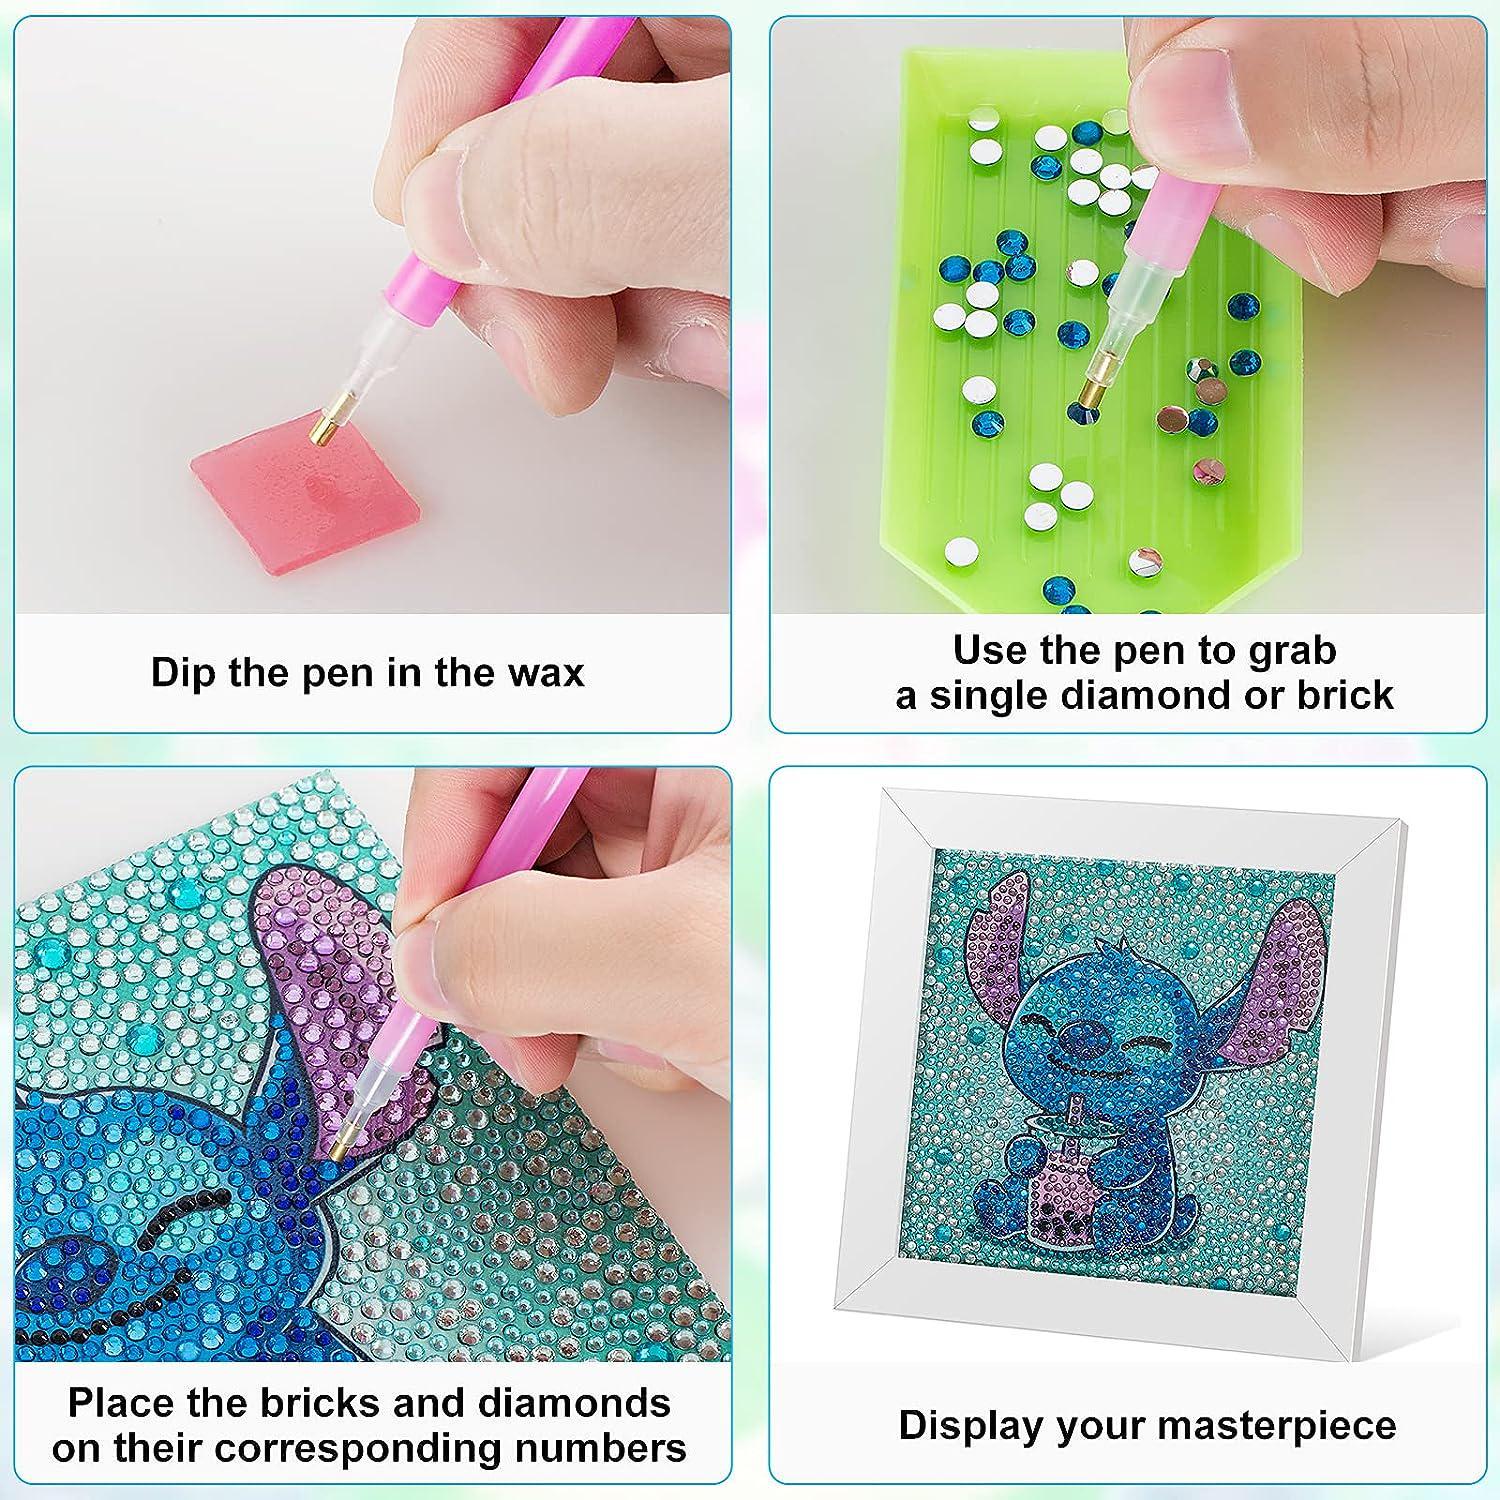  Diamond Painting Kits for Kids with Wooden Frames, 5D Diamonds  Art and Crafts for Kids, Gem Art Painting by Number Kits for Kids Girls  Boys Ages 8-12, (Owl) : Toys 